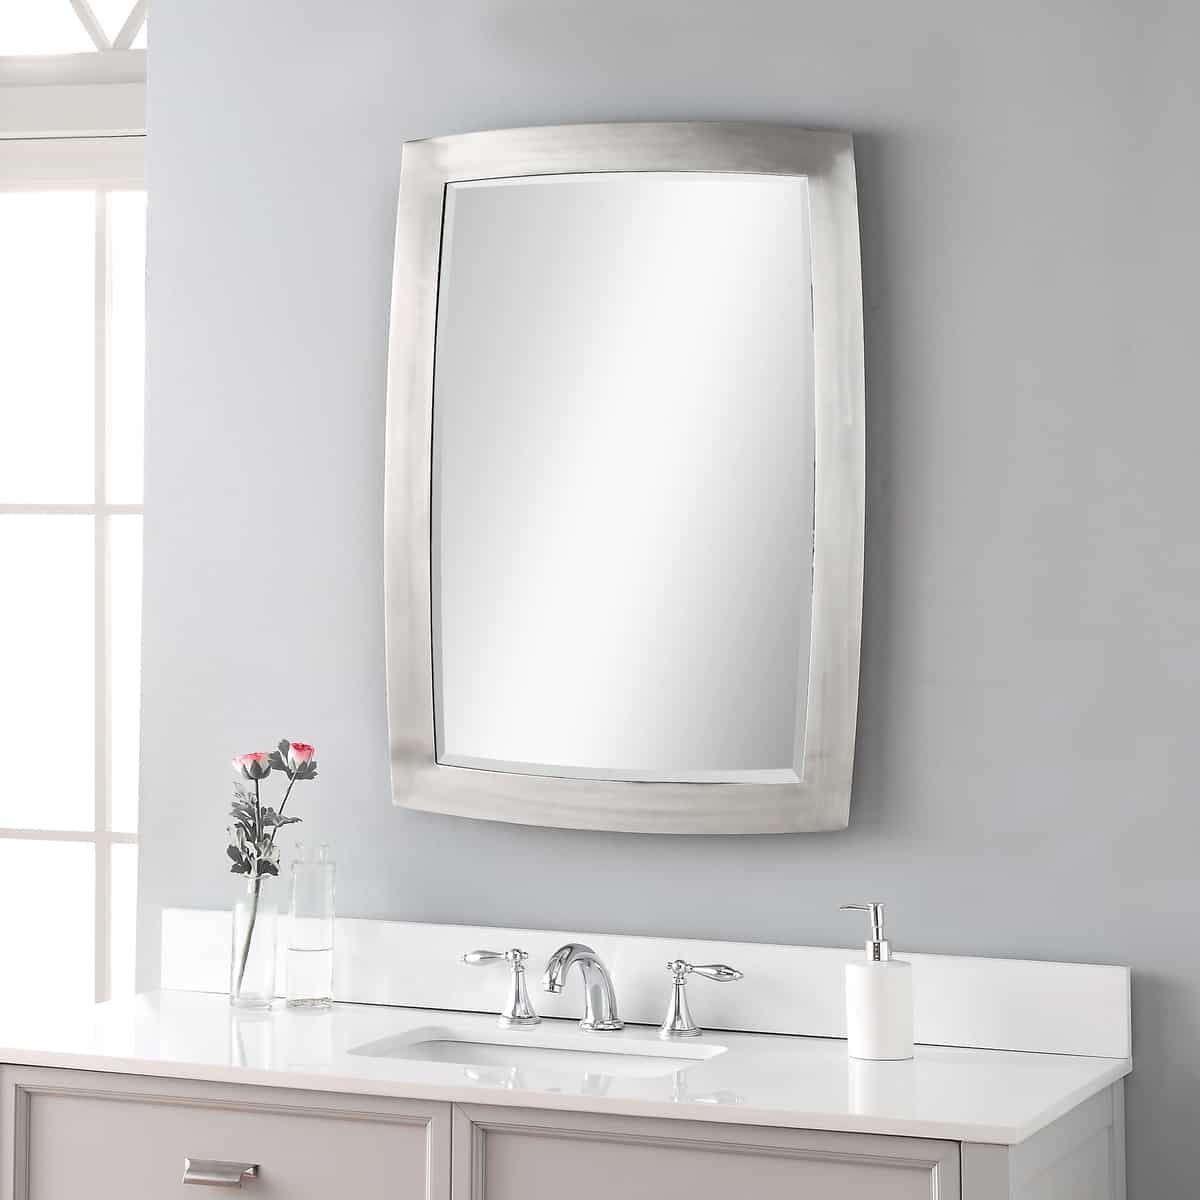 Haskill Brushed Nickel Mirror By Uttermost